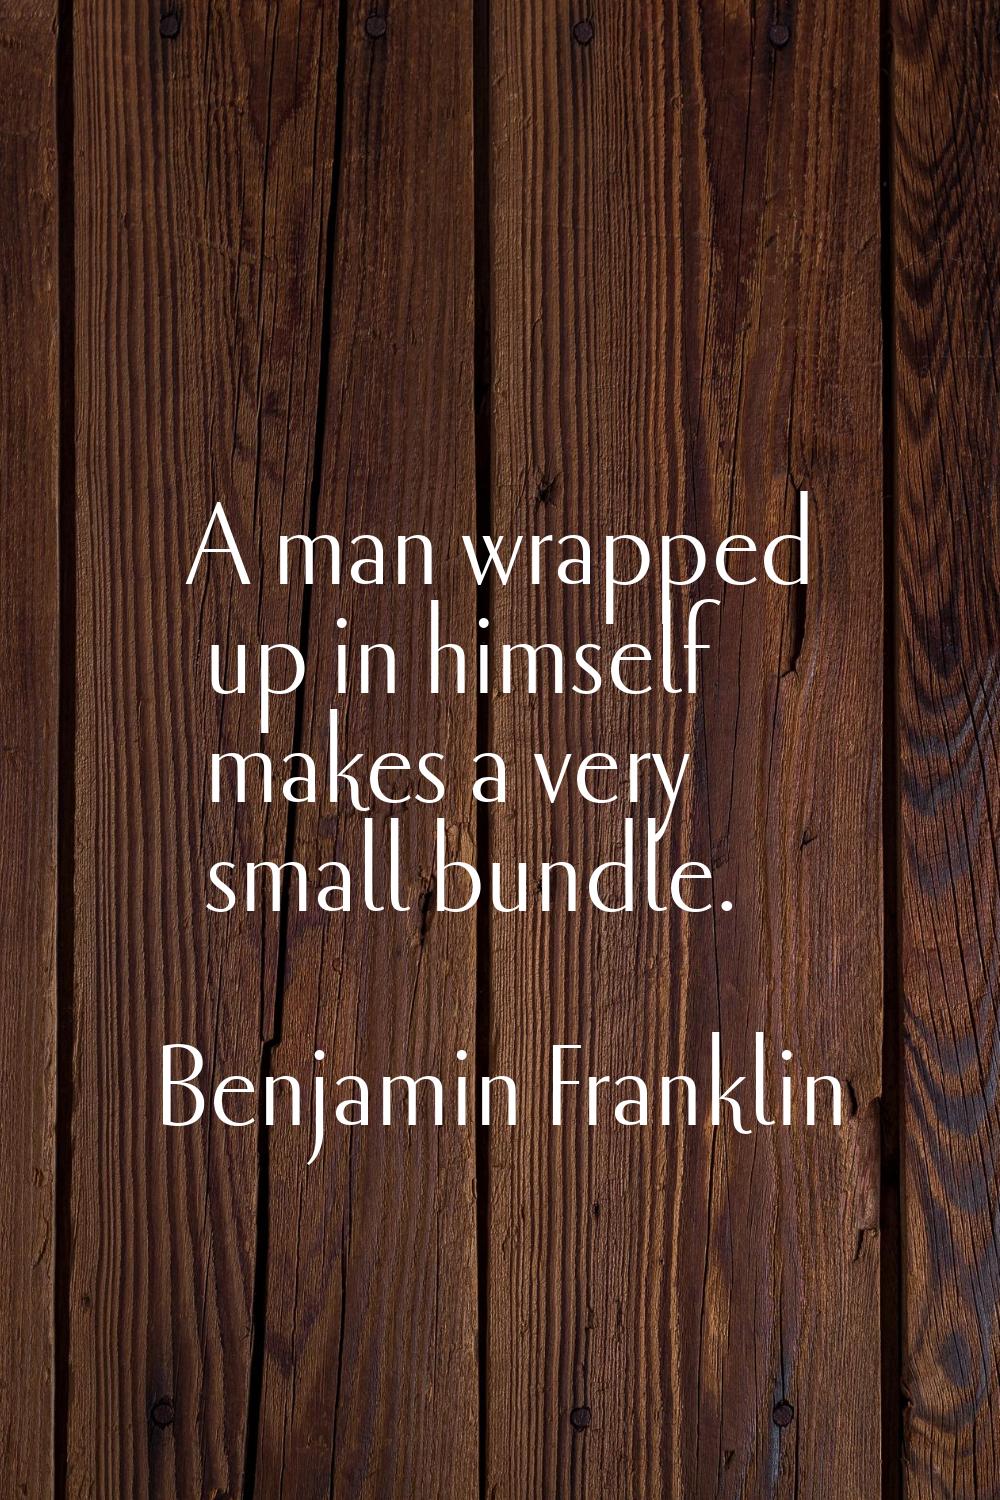 A man wrapped up in himself makes a very small bundle.